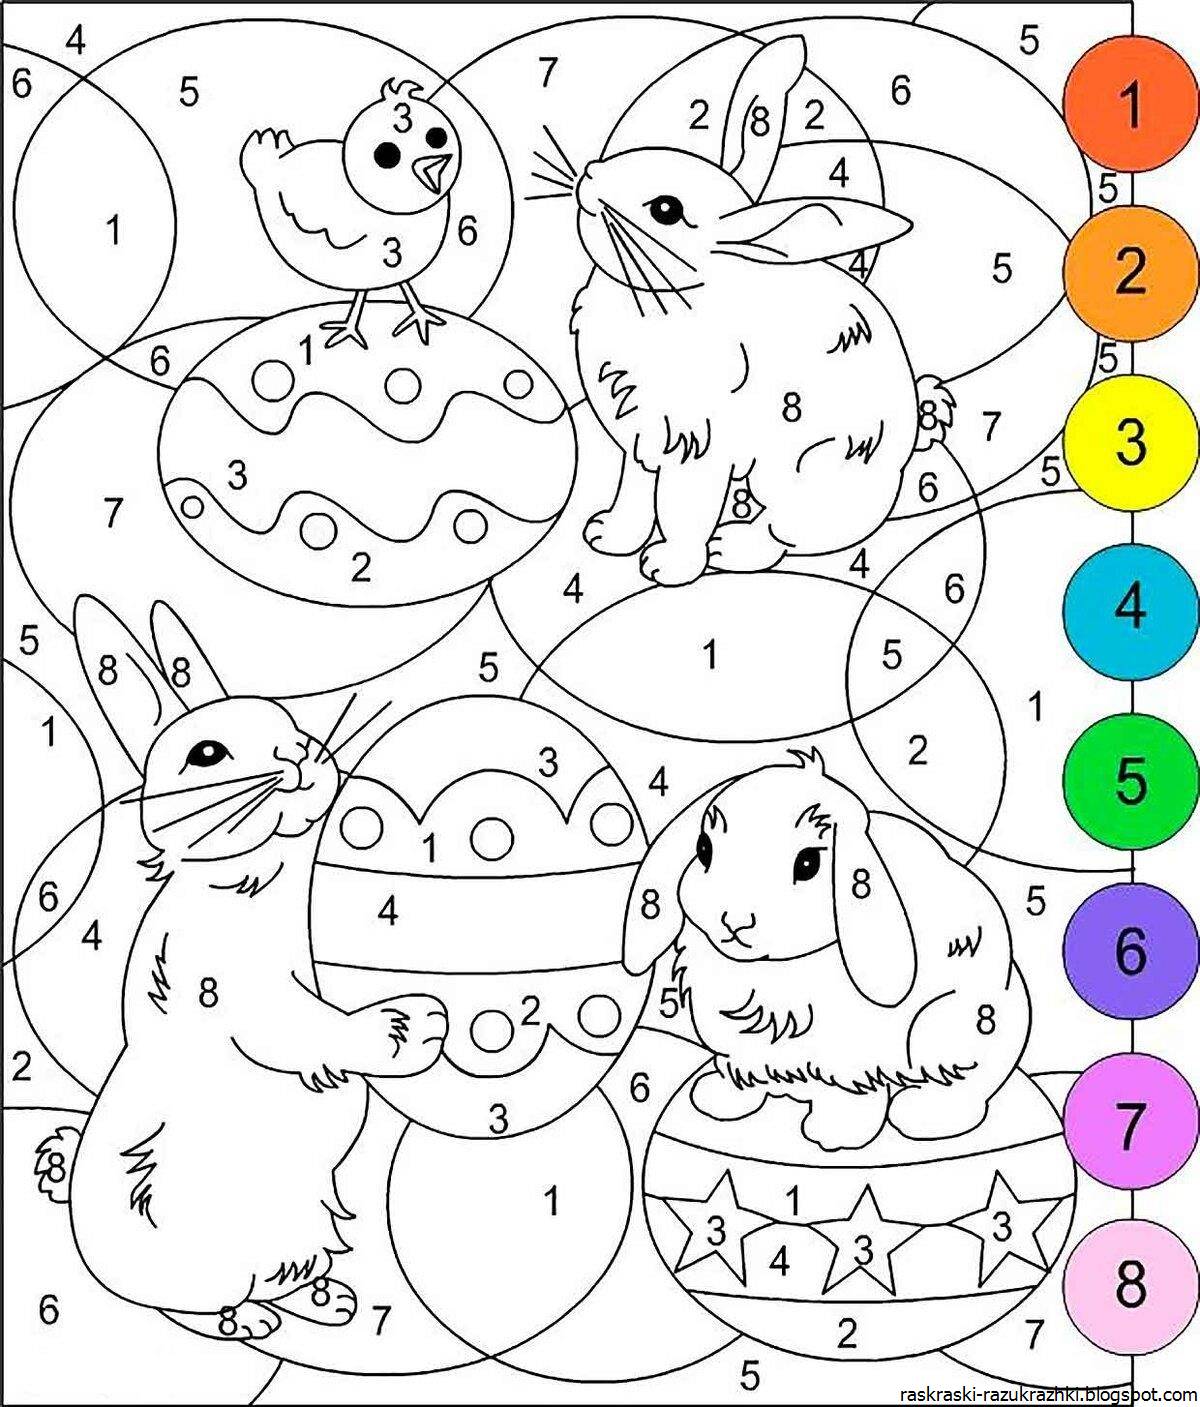 Creative coloring book for 7-8 year olds